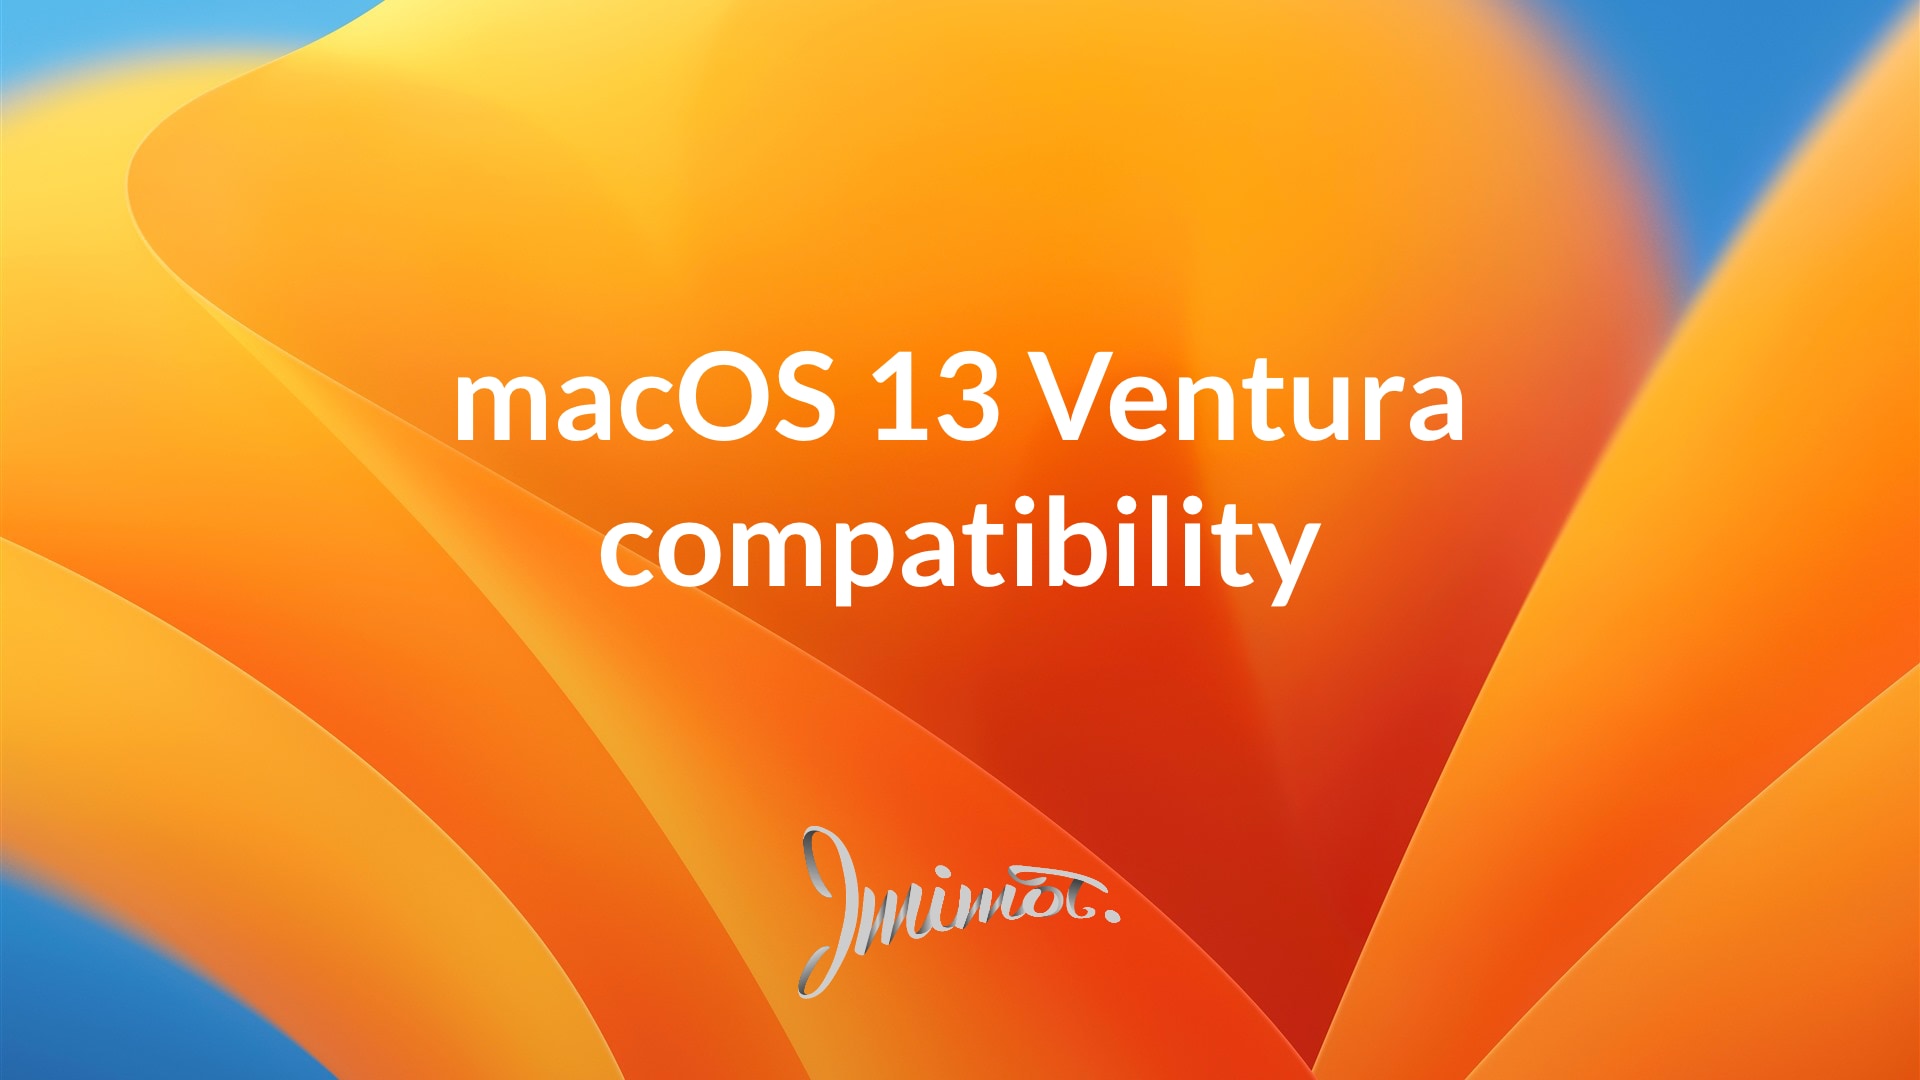 macos ventura is compatible with these computers